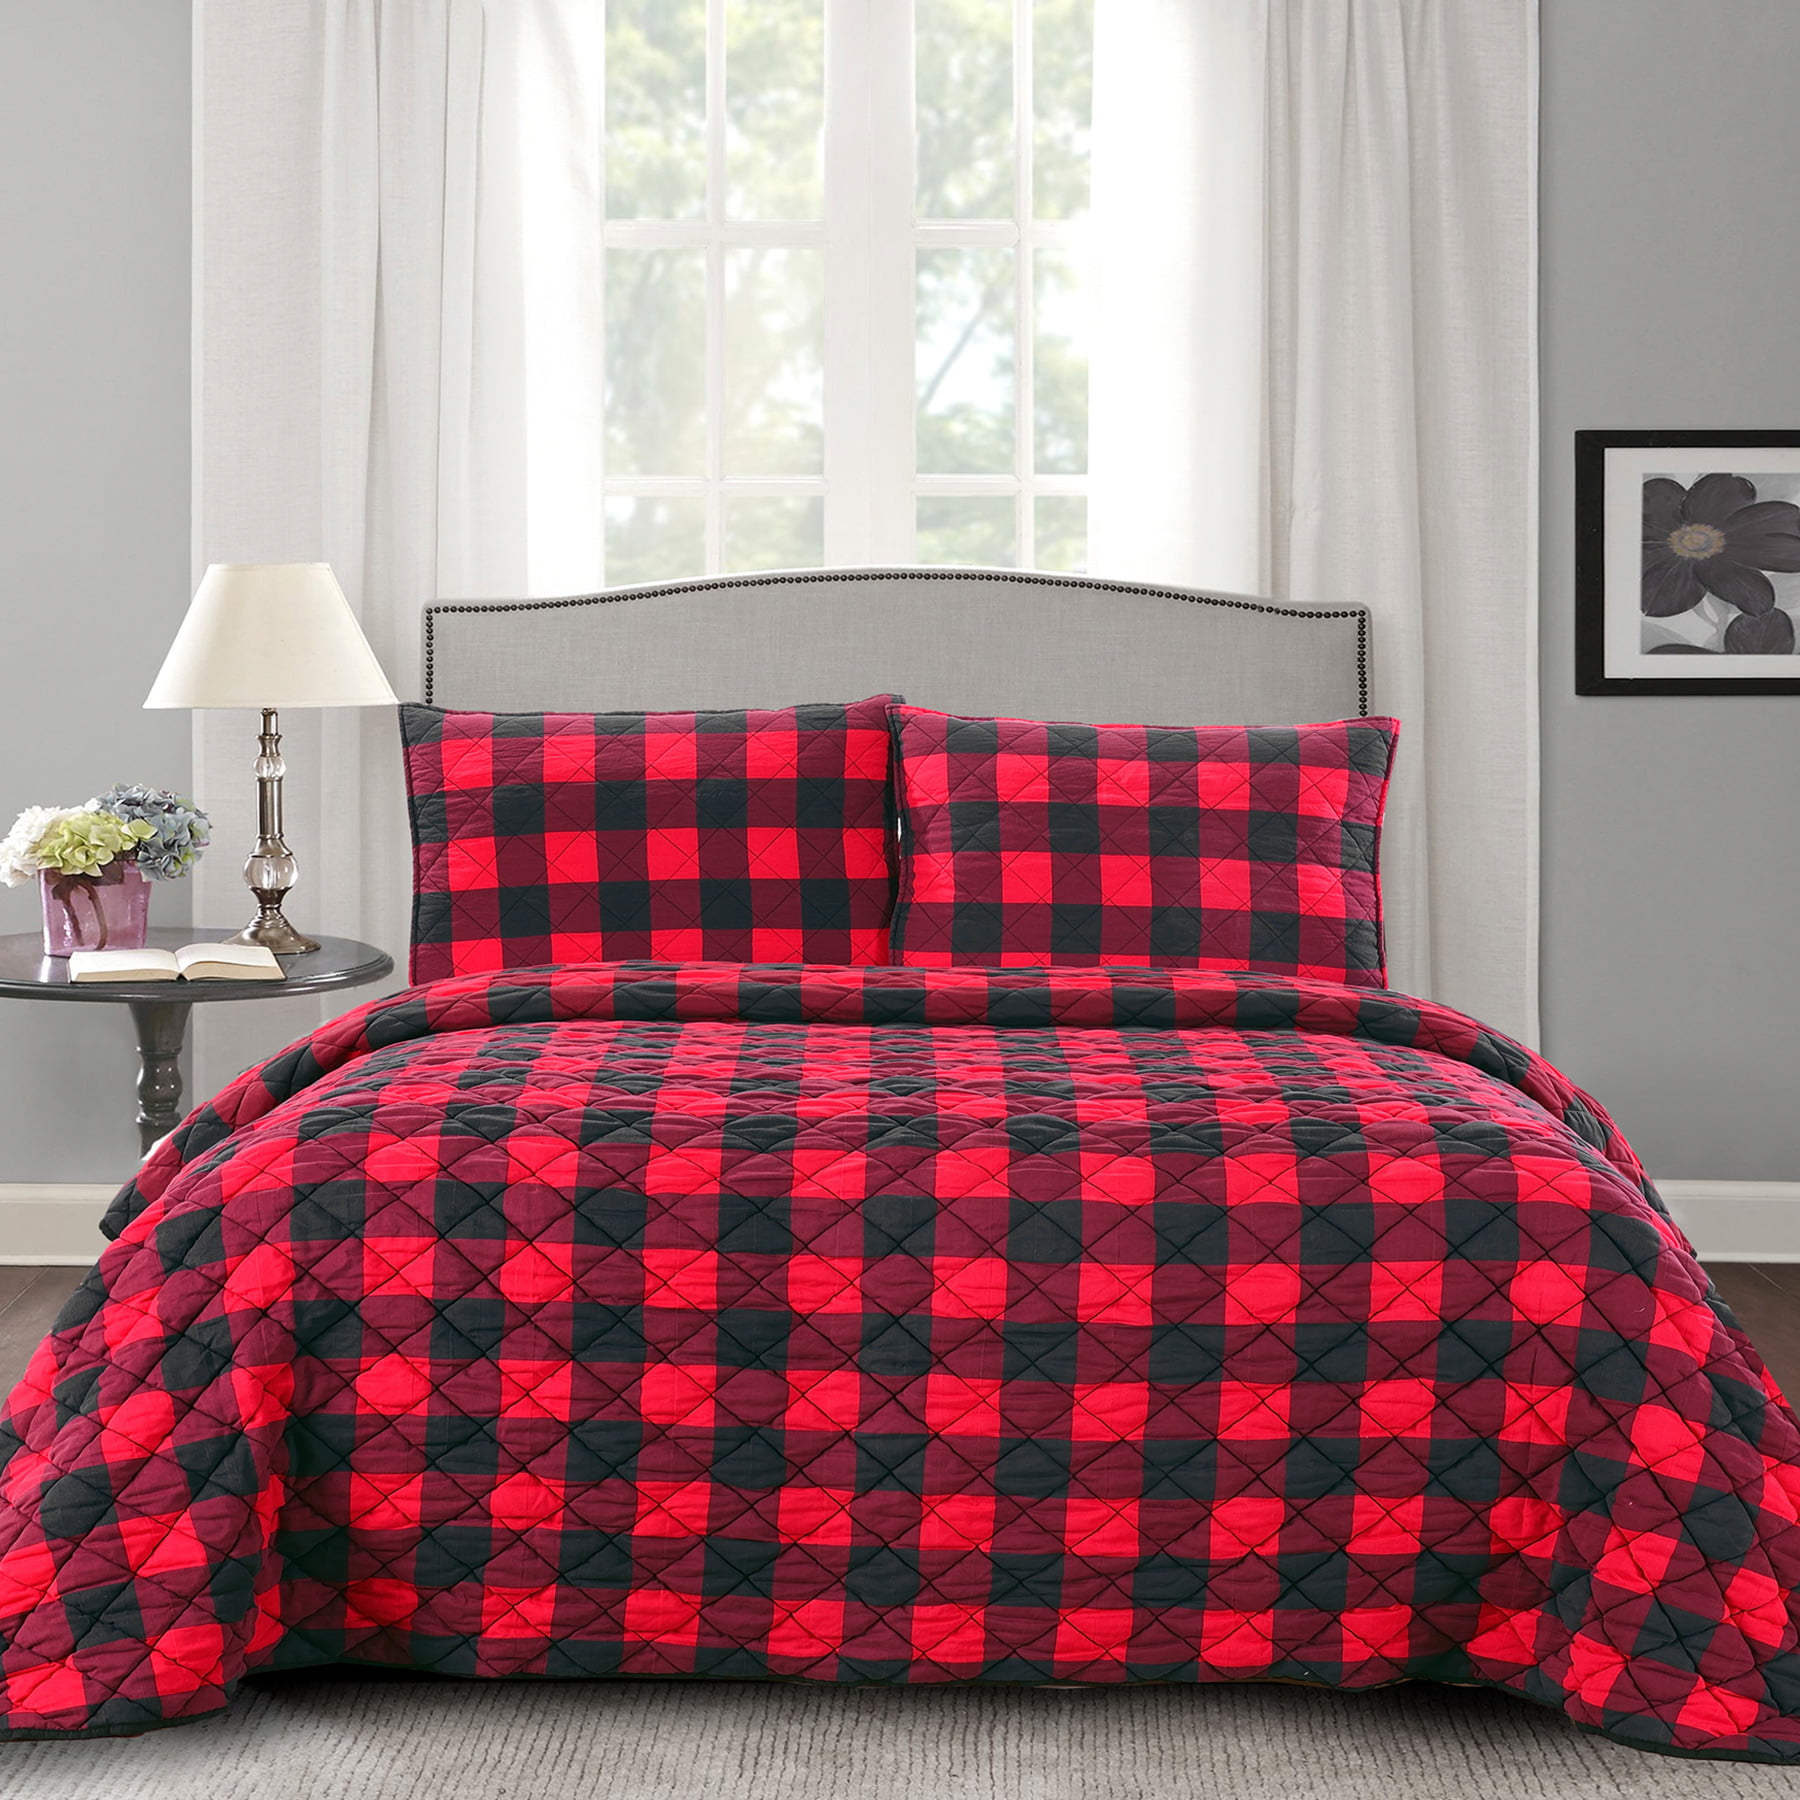 Plaid Reversible Buffalo 3 Piece Comforter with Two Pillow Shams Queen Size Set 